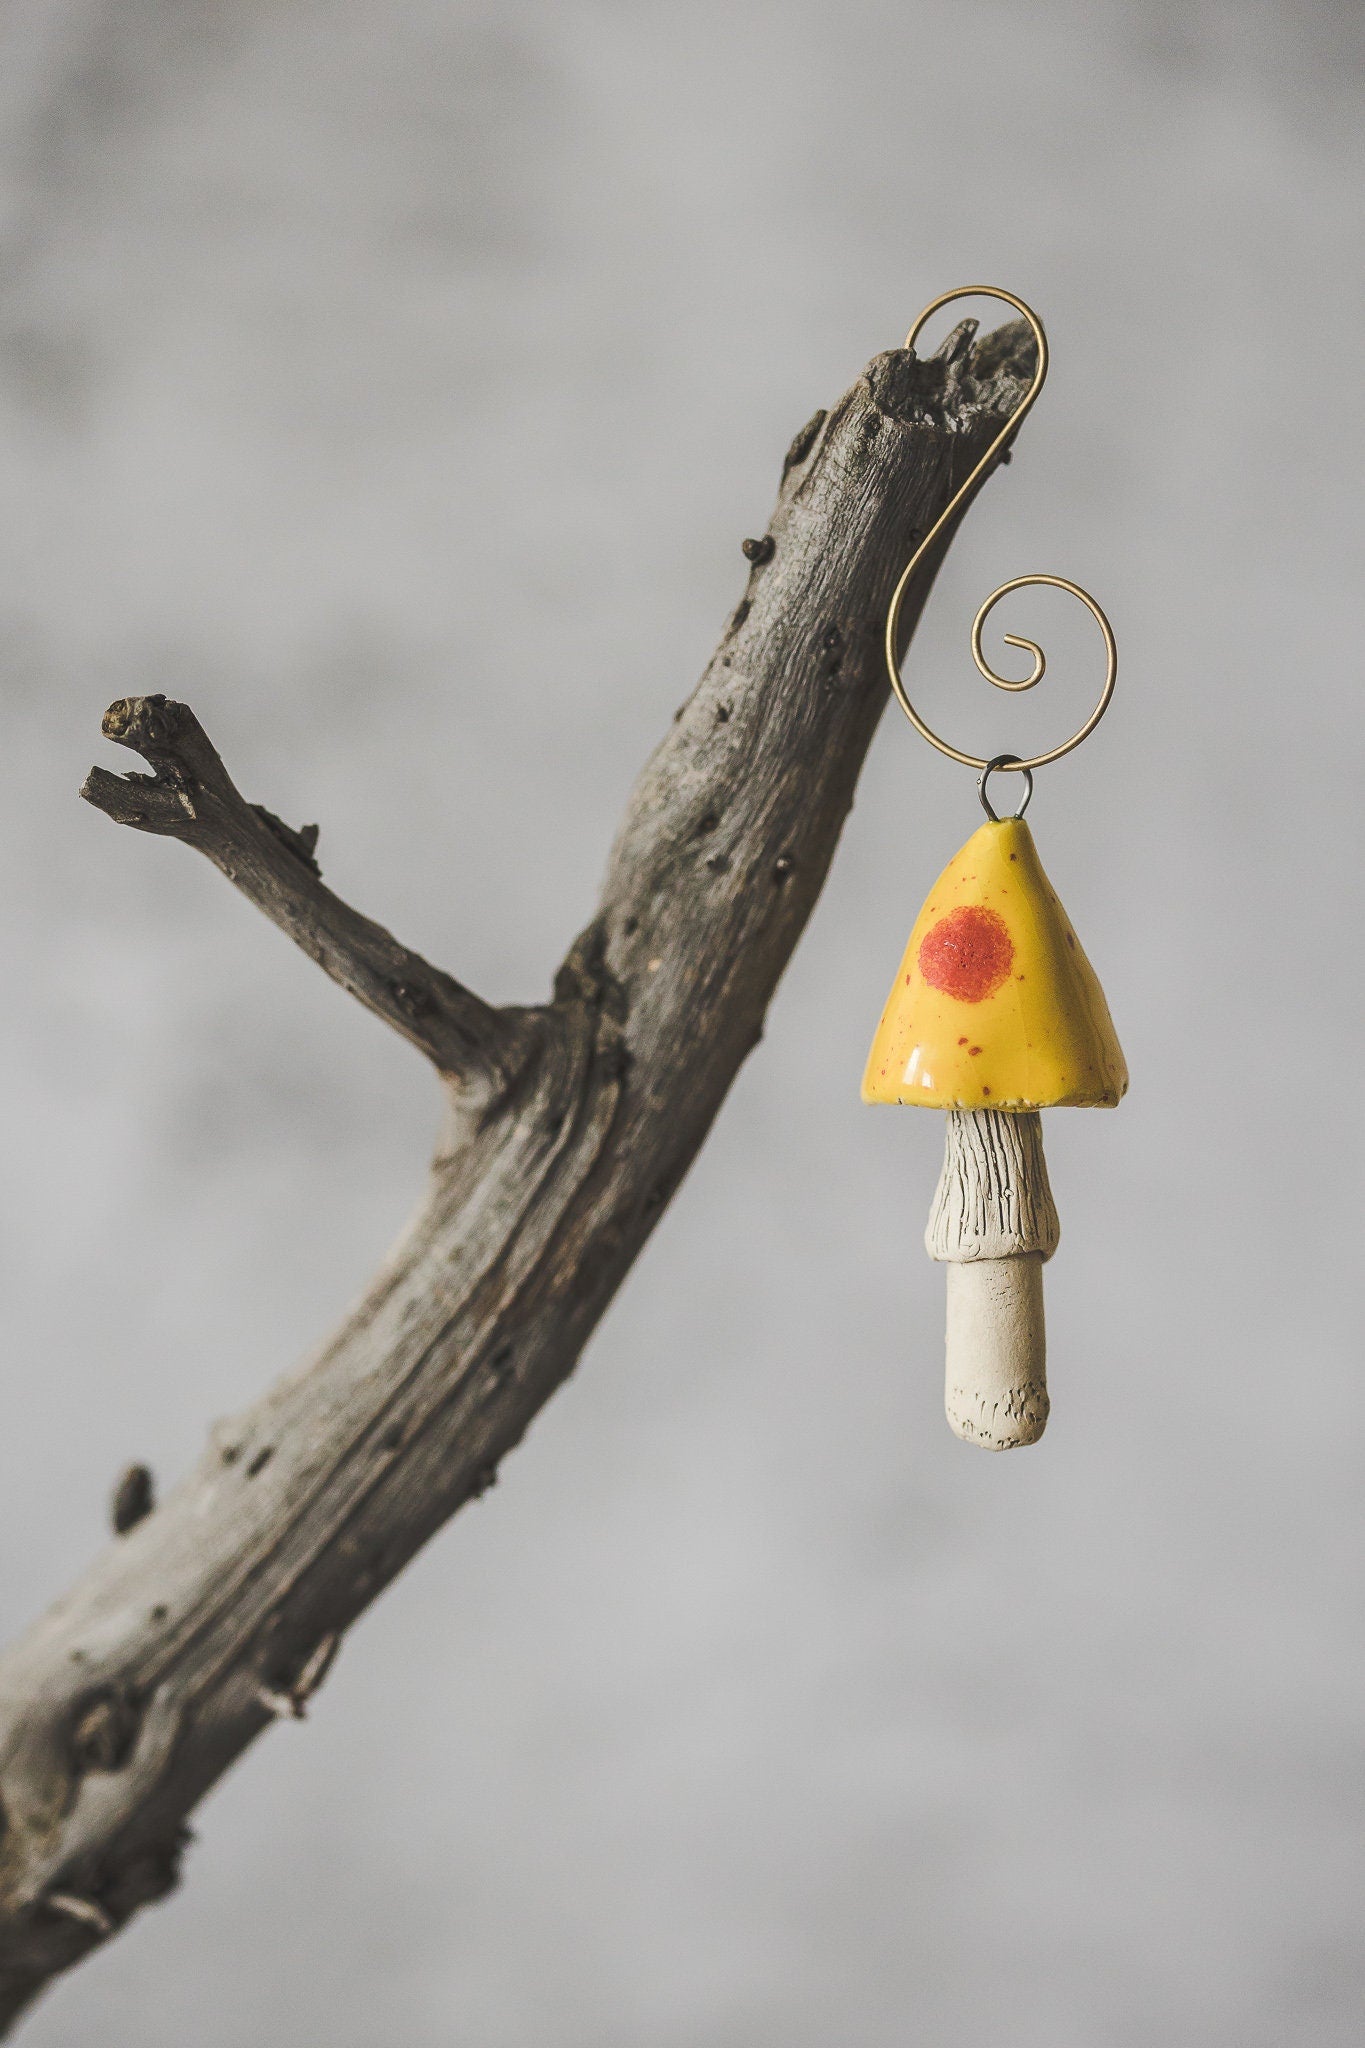 Ceramic yellow mushroom with red dots Christmas ornament - Colorful pottery fungus Christmas tree decoration - Christmas gift